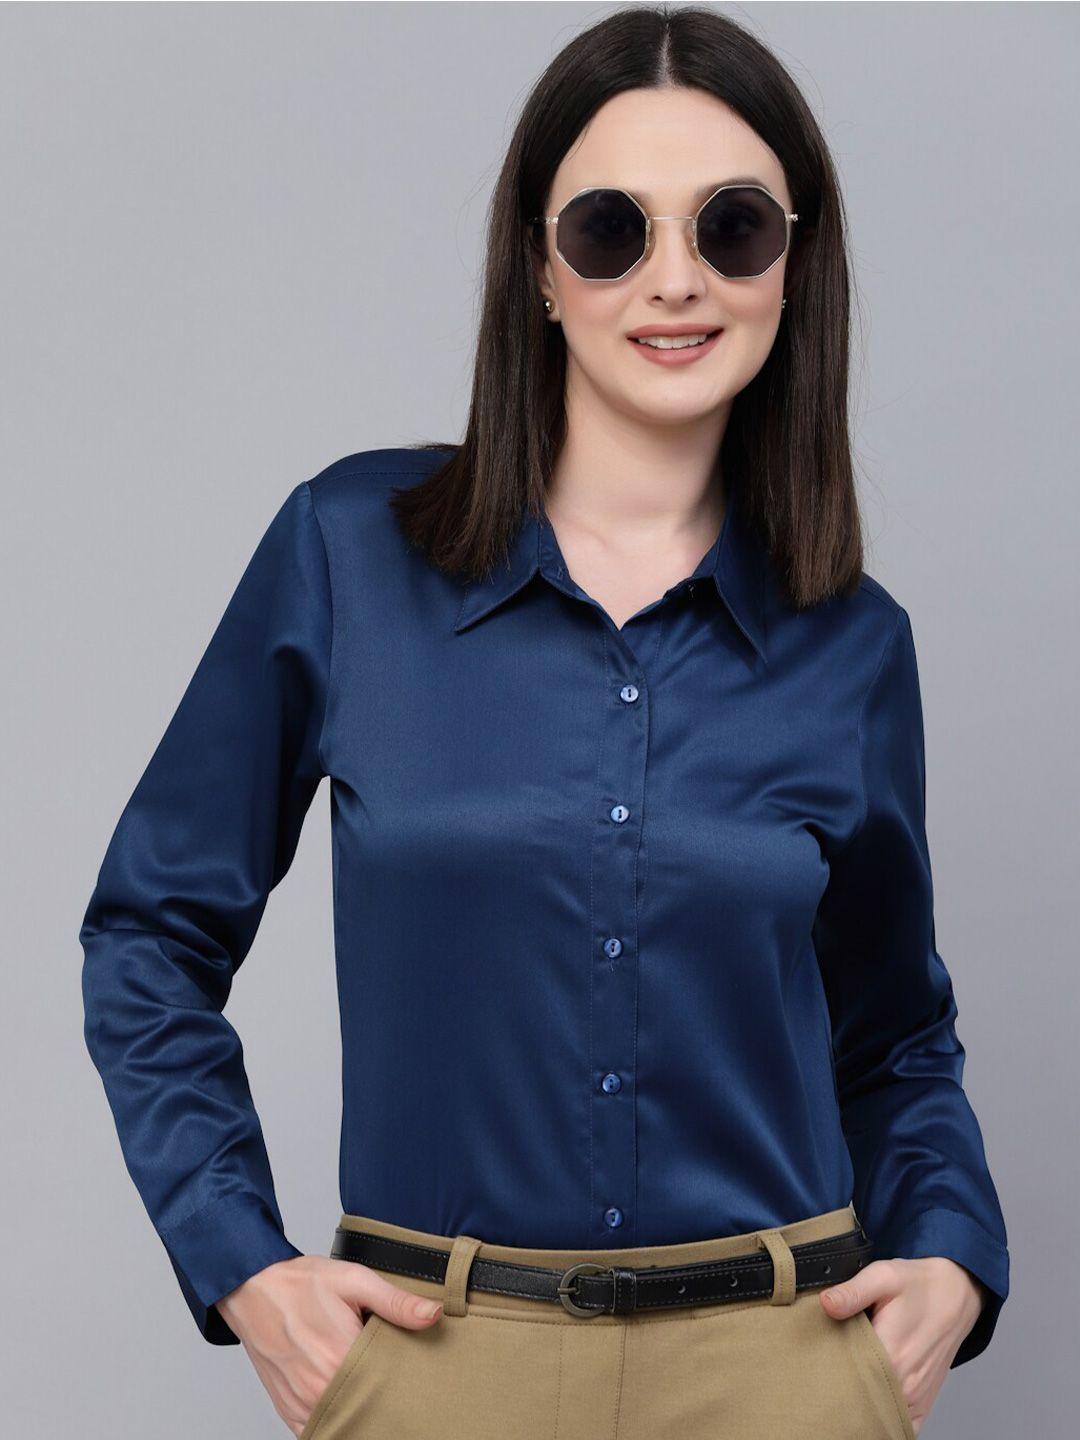 style quotient smart spread collar formal shirt